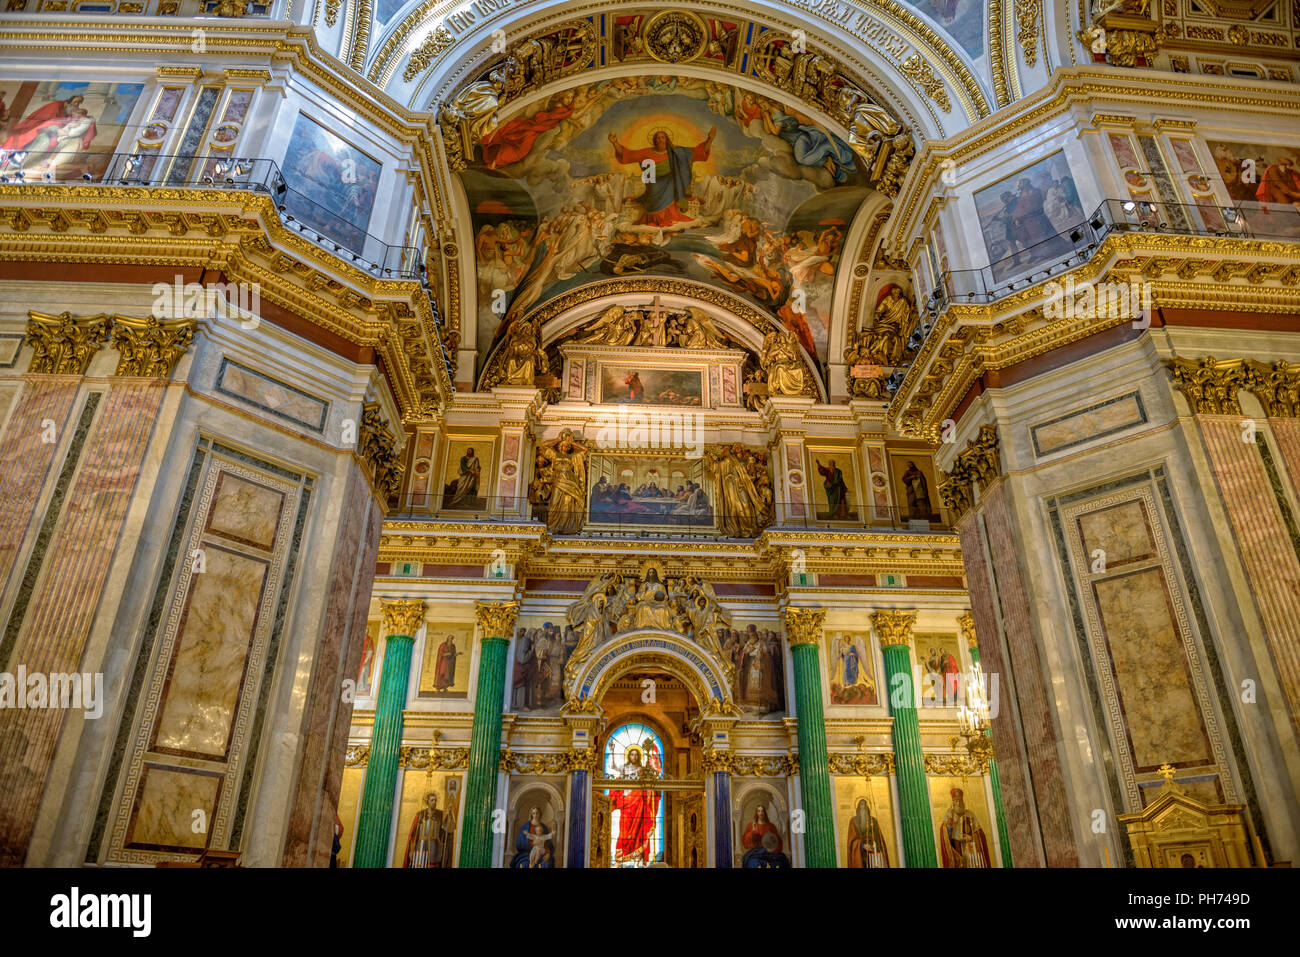 Altar in Saint Isaac's Cathedral. St. Petersburg, Stock Photo